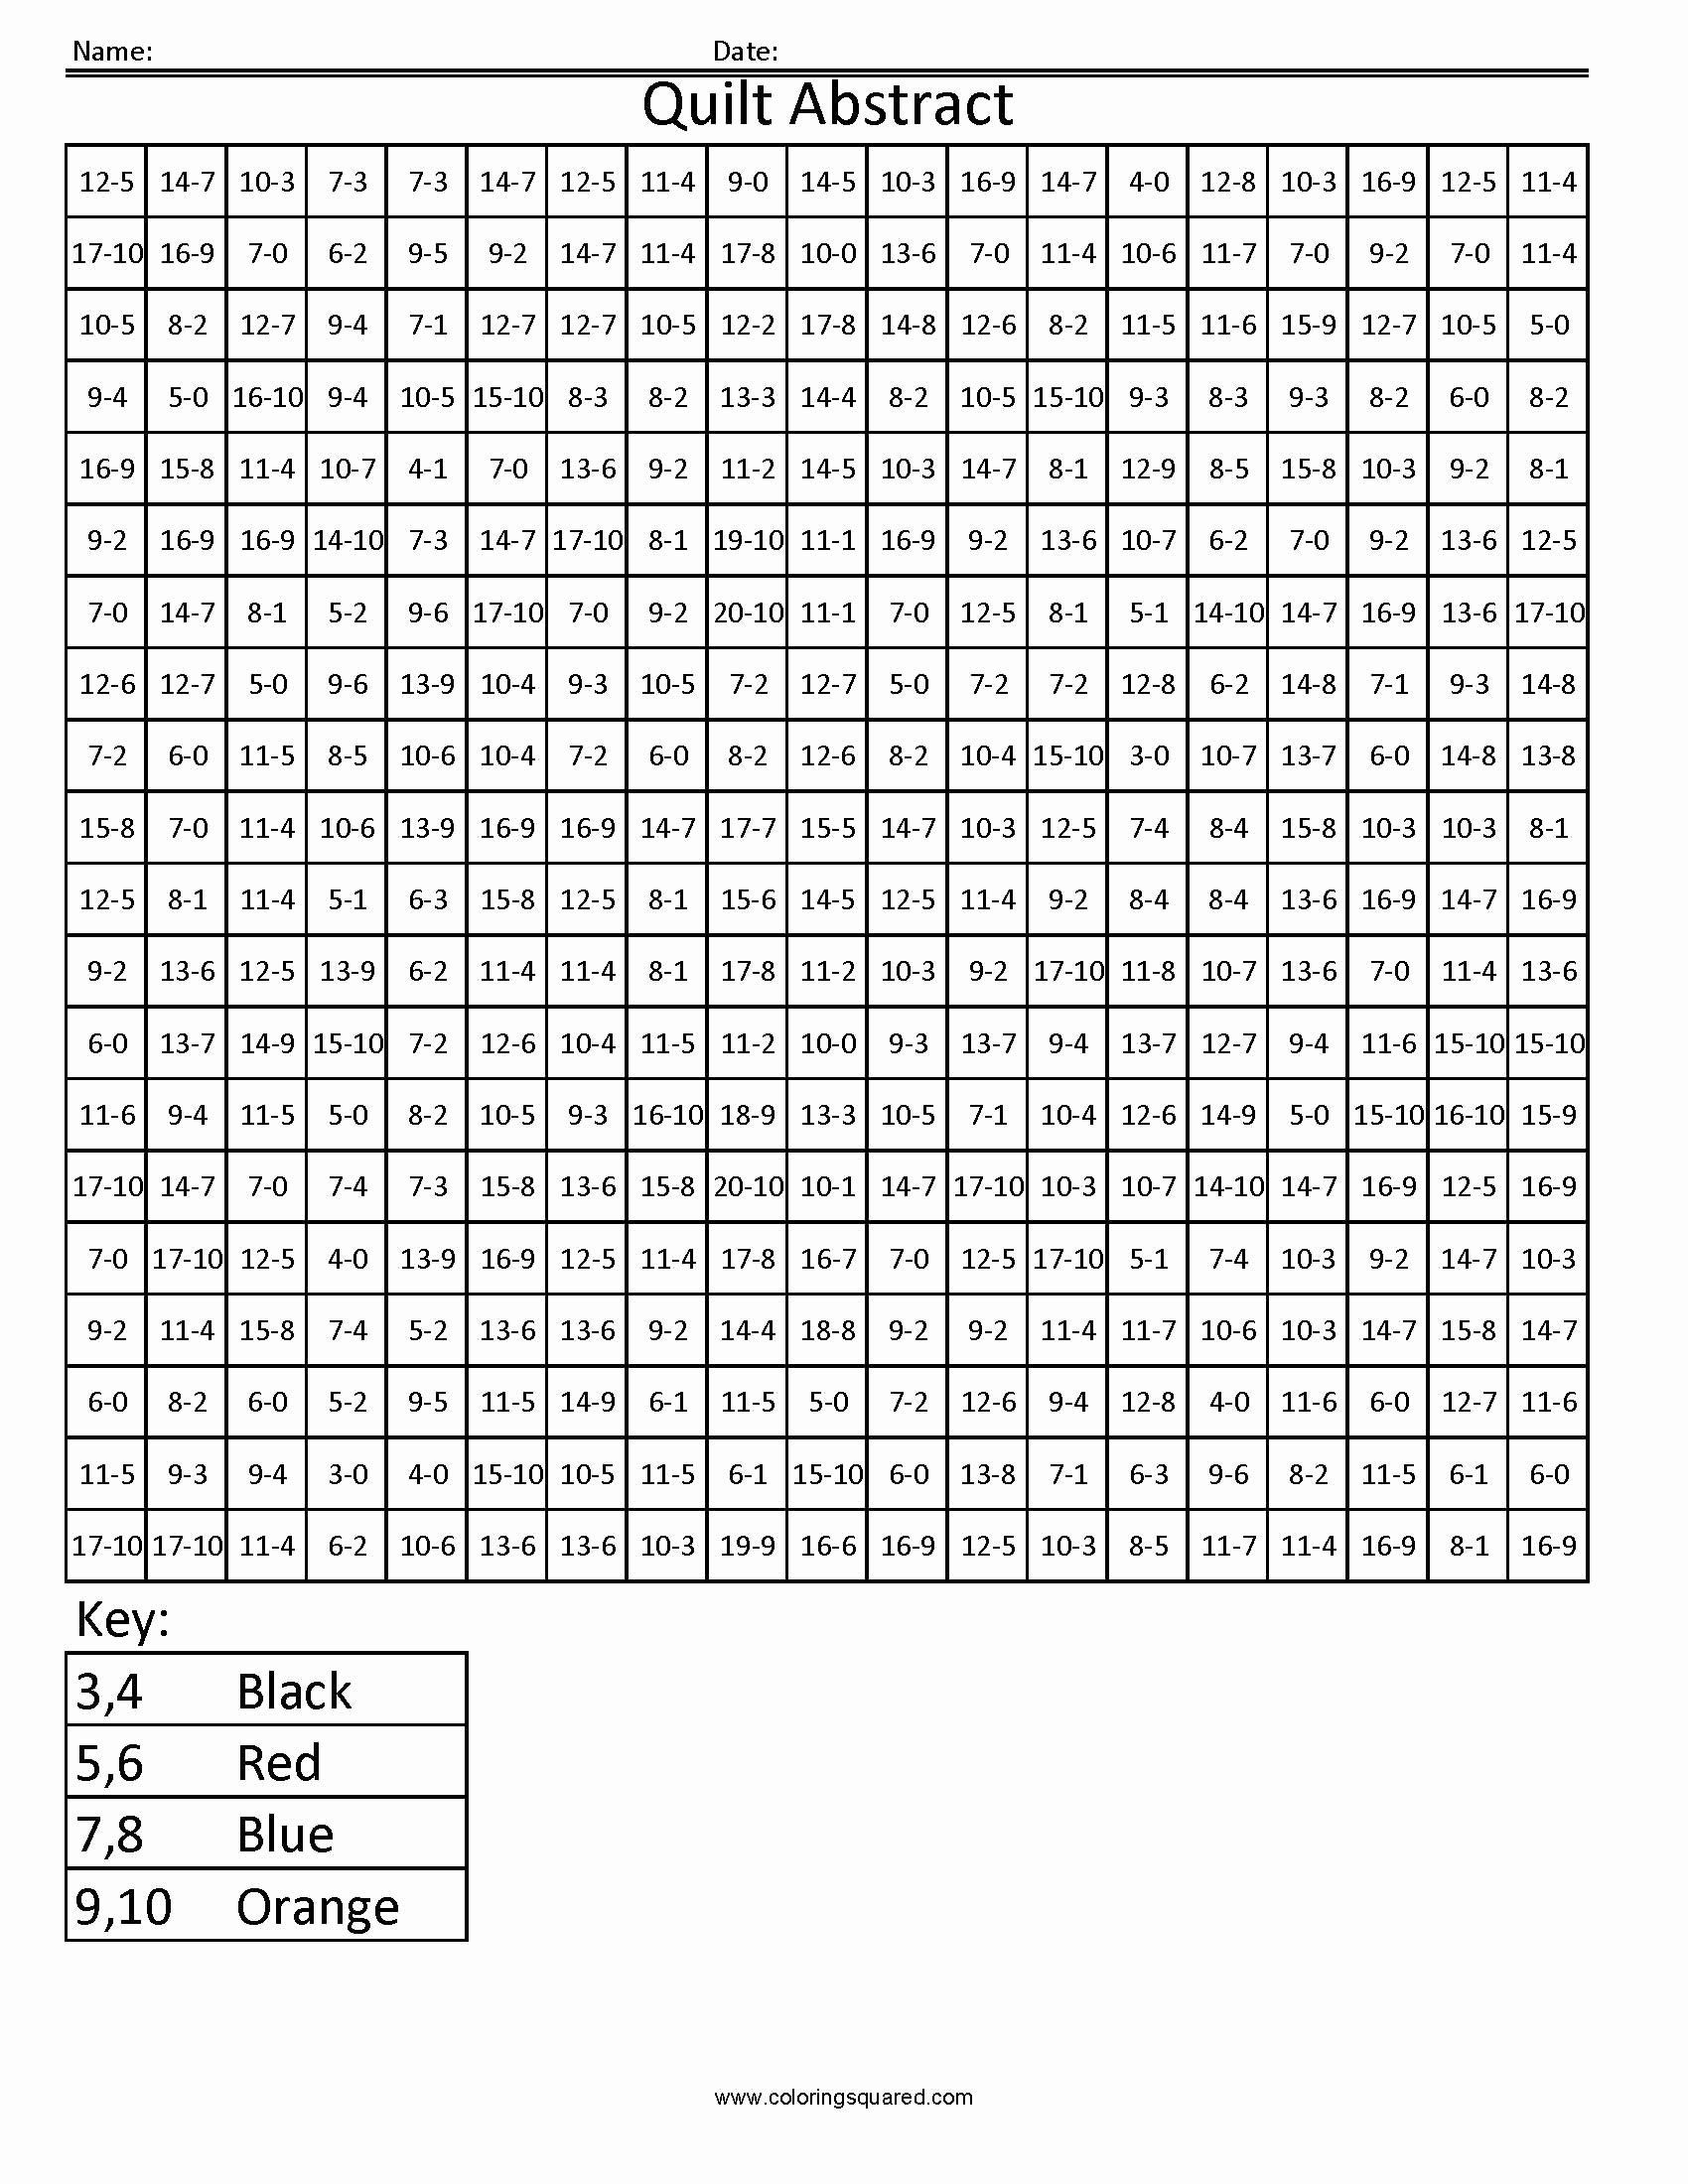 Free Grid Coloring Worksheets Mystery Picture Grid Coloring Worksheets In 2020